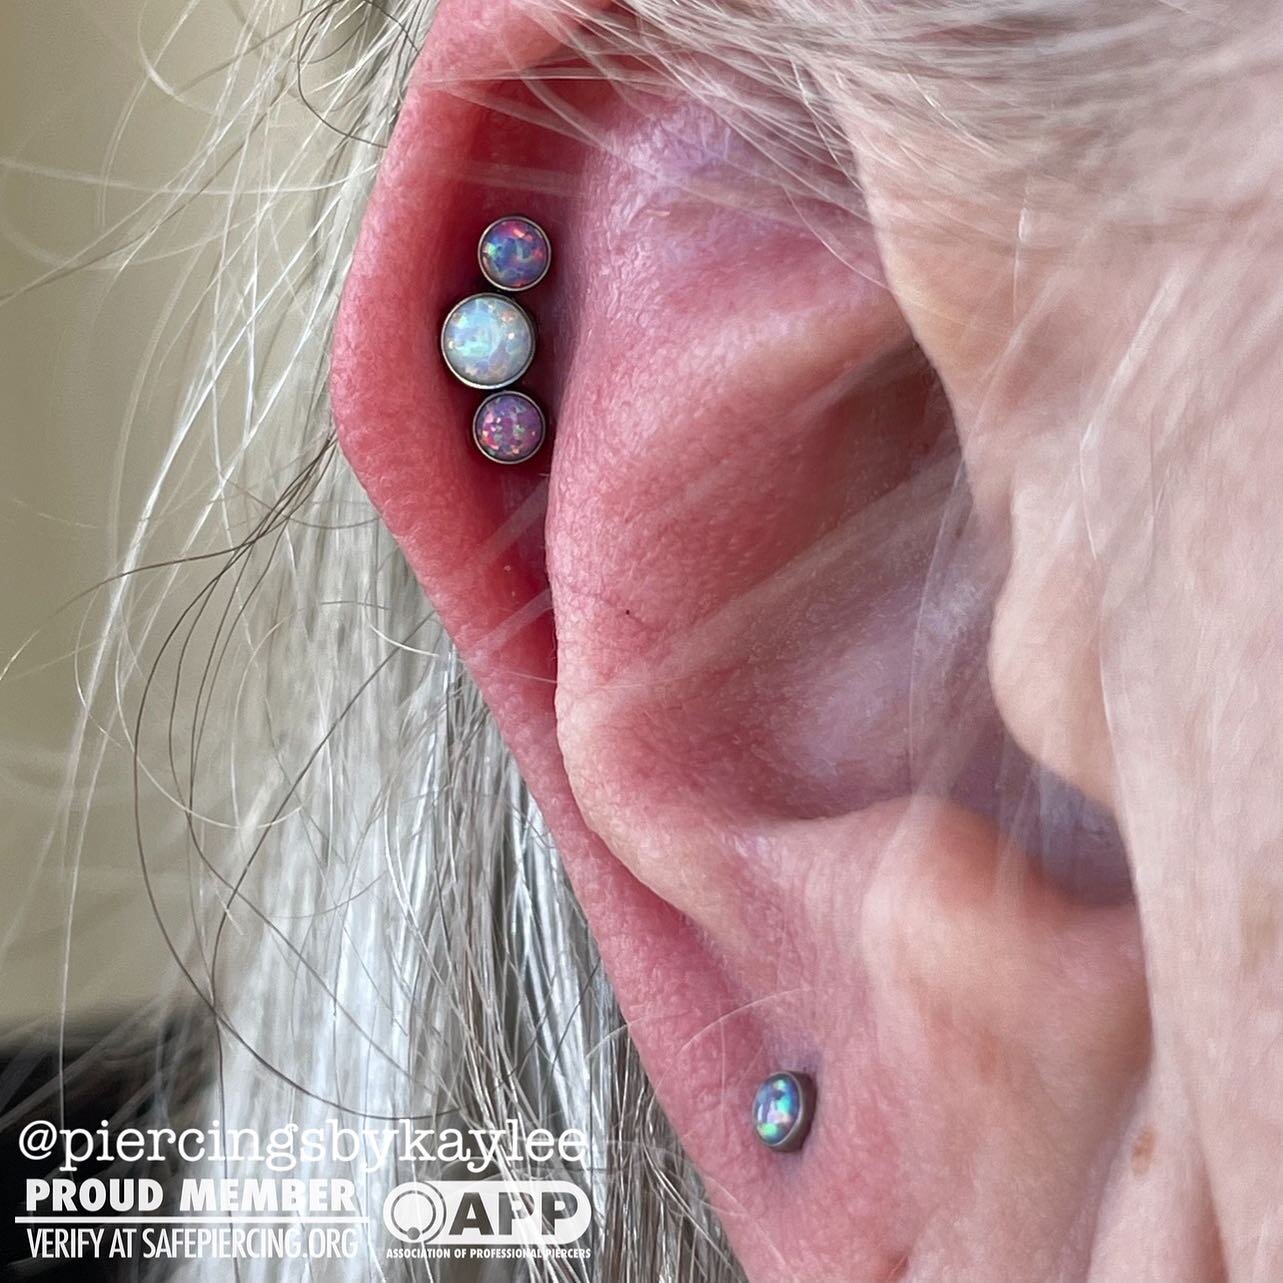 Fresh helix and third lobe piercing featuring a three gem cluster with lavender and white opal. For the third lobe piercing it was done with a matching lavender opal ✨ 
.
.
.
.
#piercing #piercings #pierced #helixpiercing #earlobepiercing #safepierci